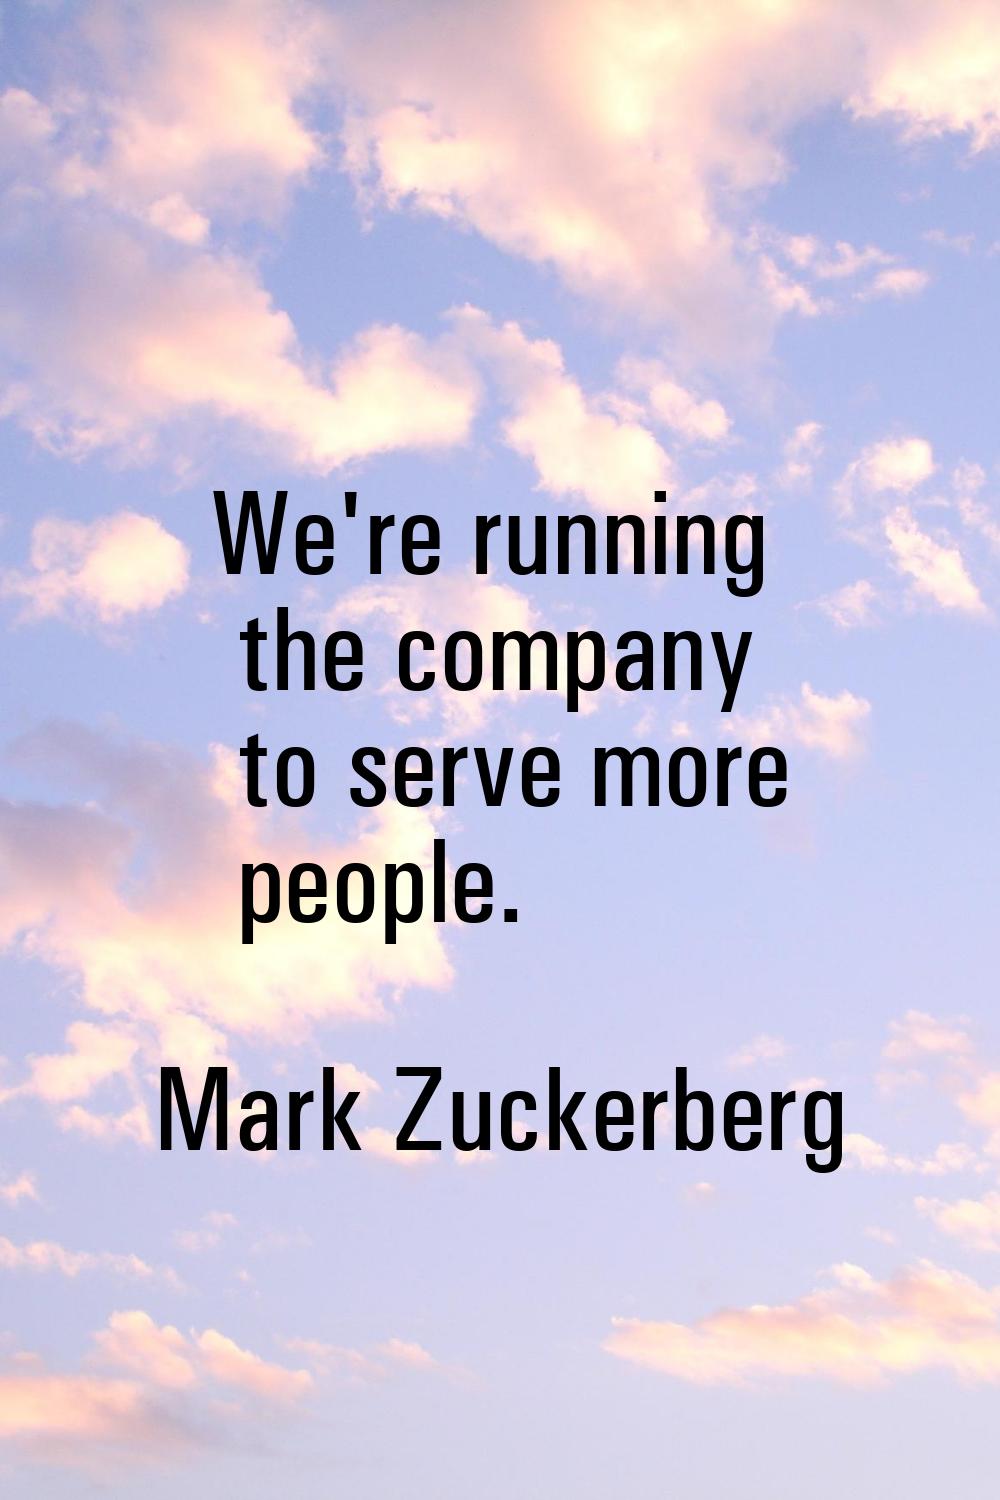 We're running the company to serve more people.